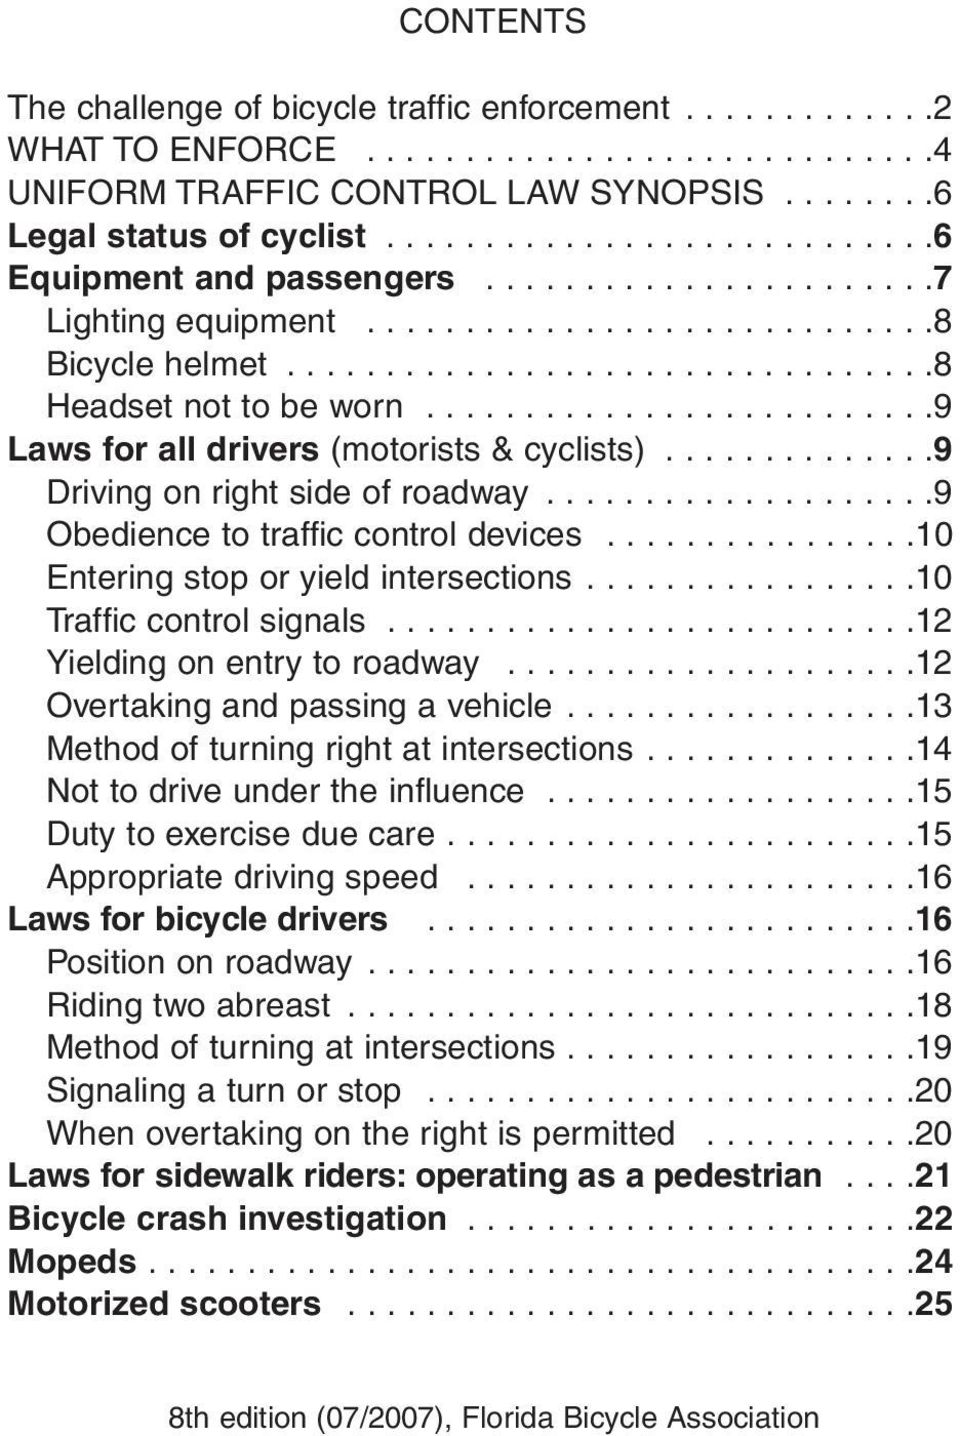 .........................9 Laws for all drivers (motorists & cyclists)..............9 Driving on right side of roadway....................9 Obedience to traffic control devices.